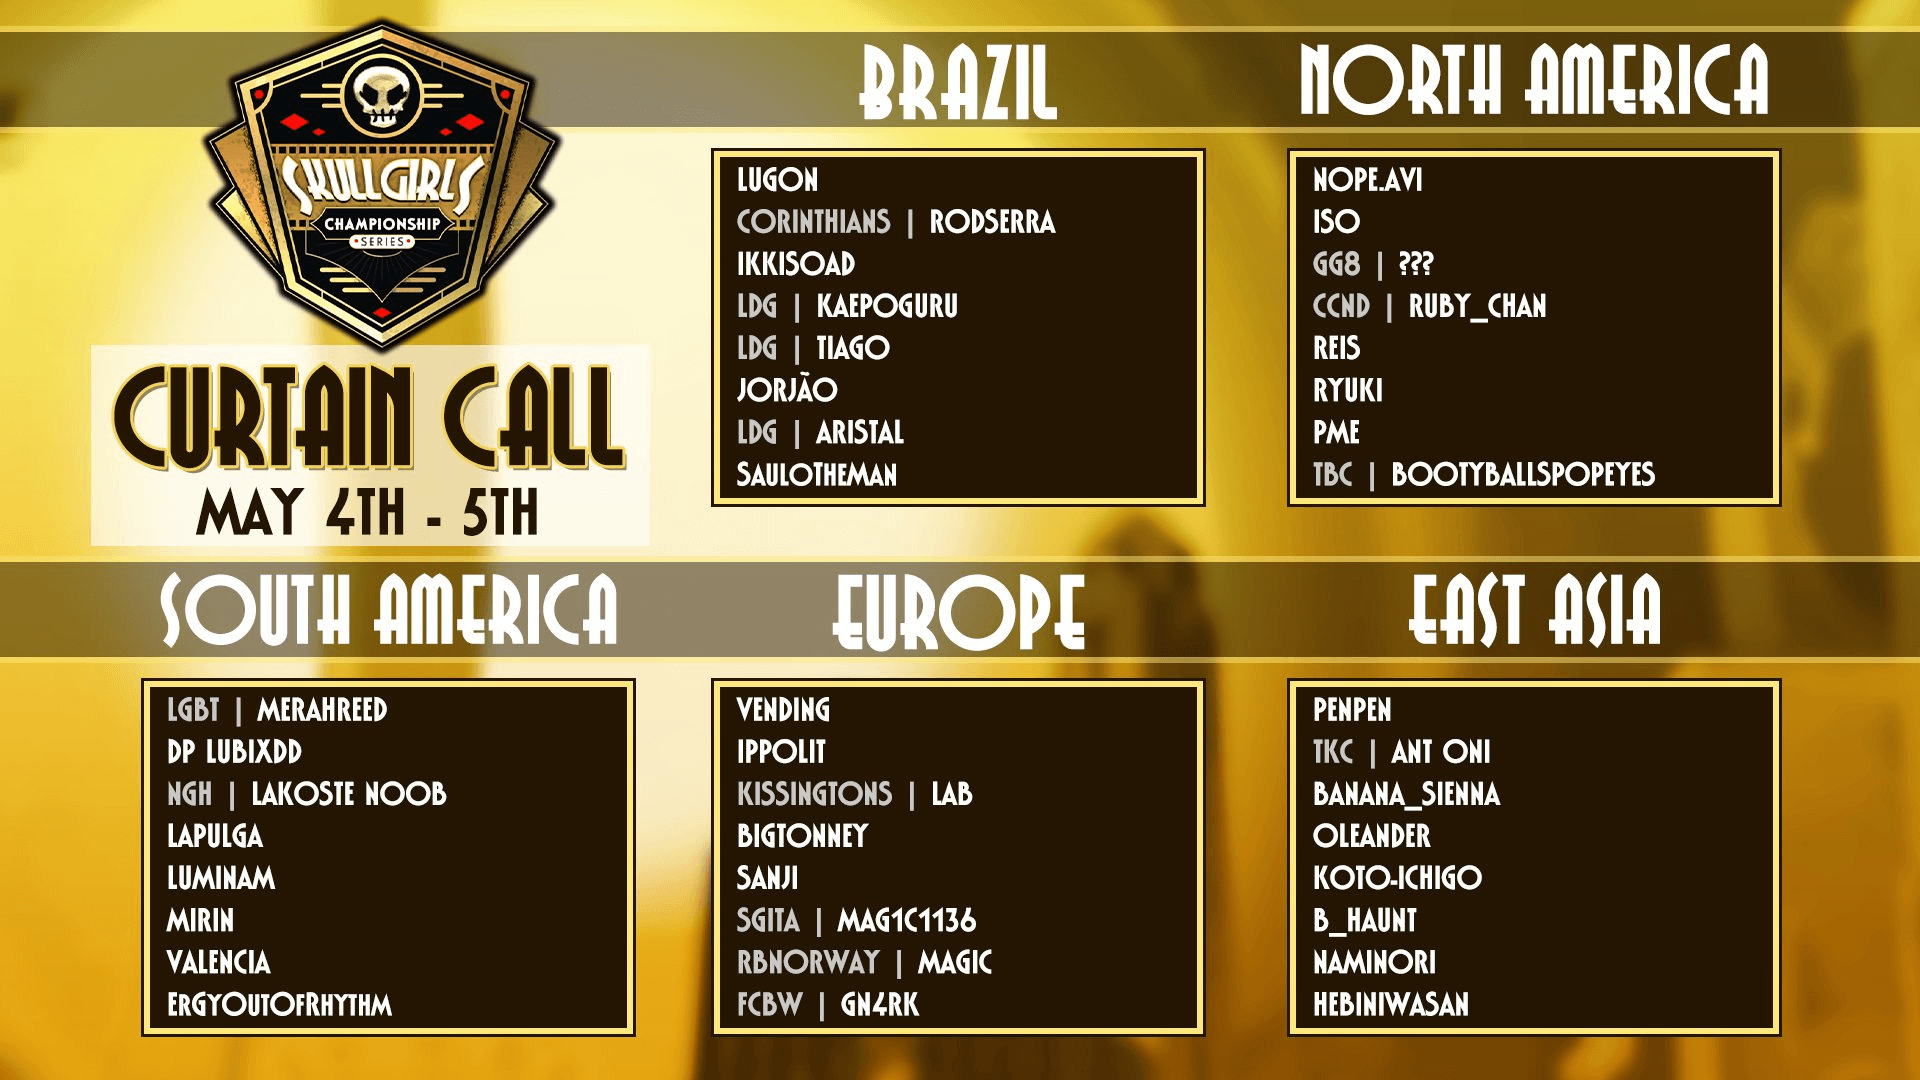 Skullgirls Curtain Call Finals Are This Weekend